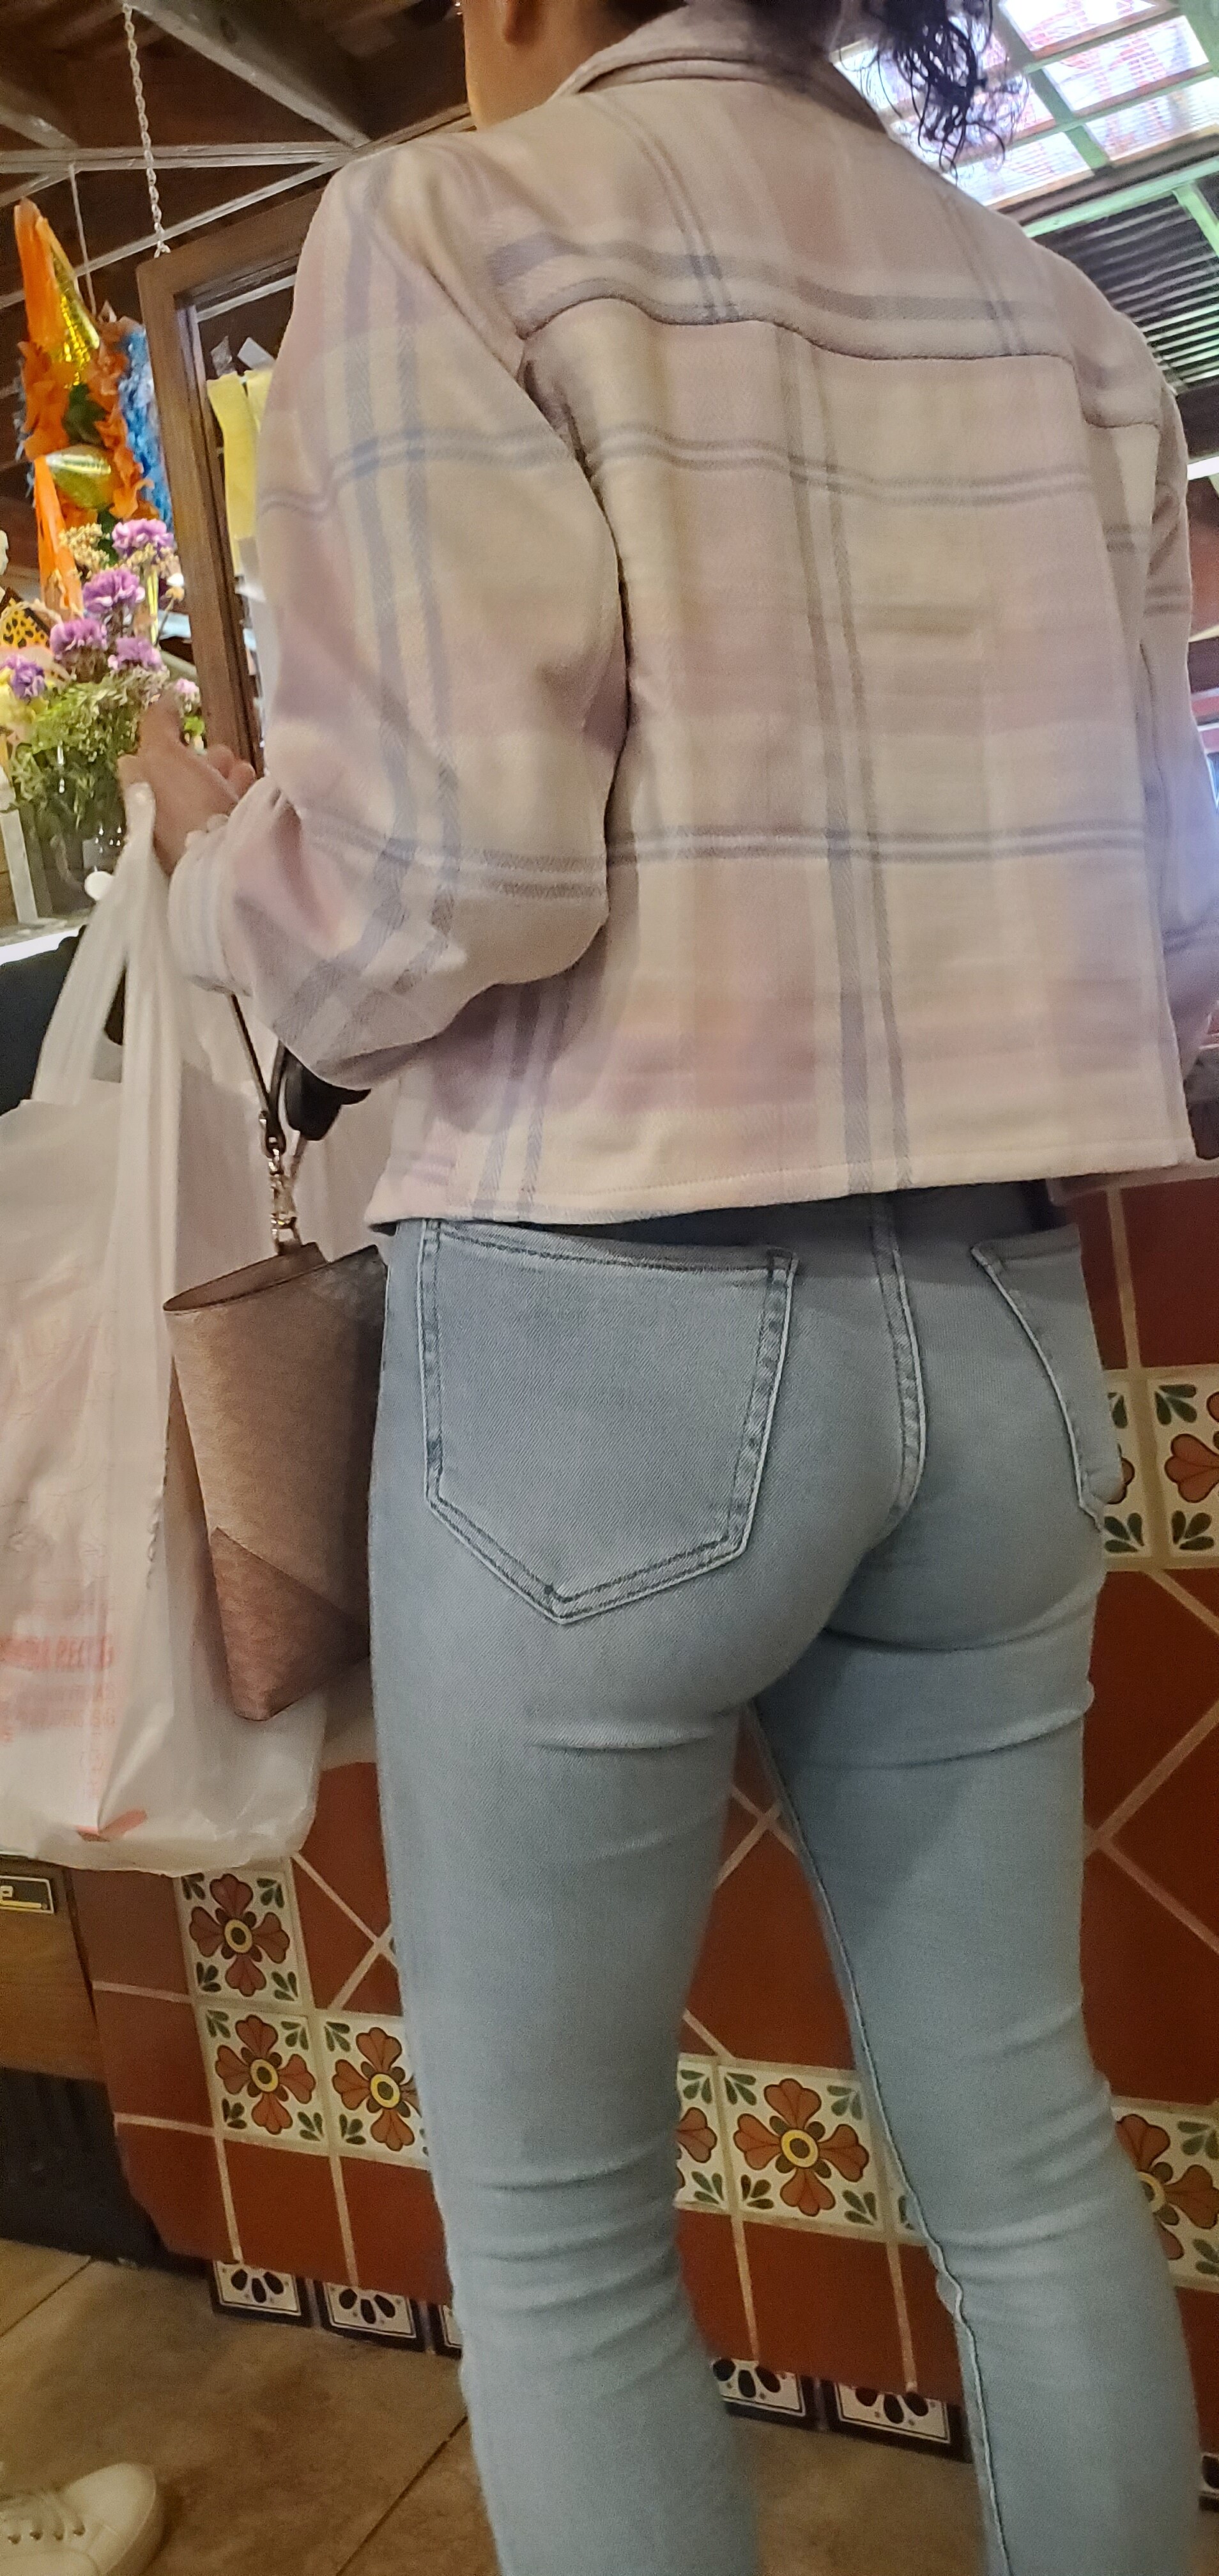 Latina Ass In Jeans